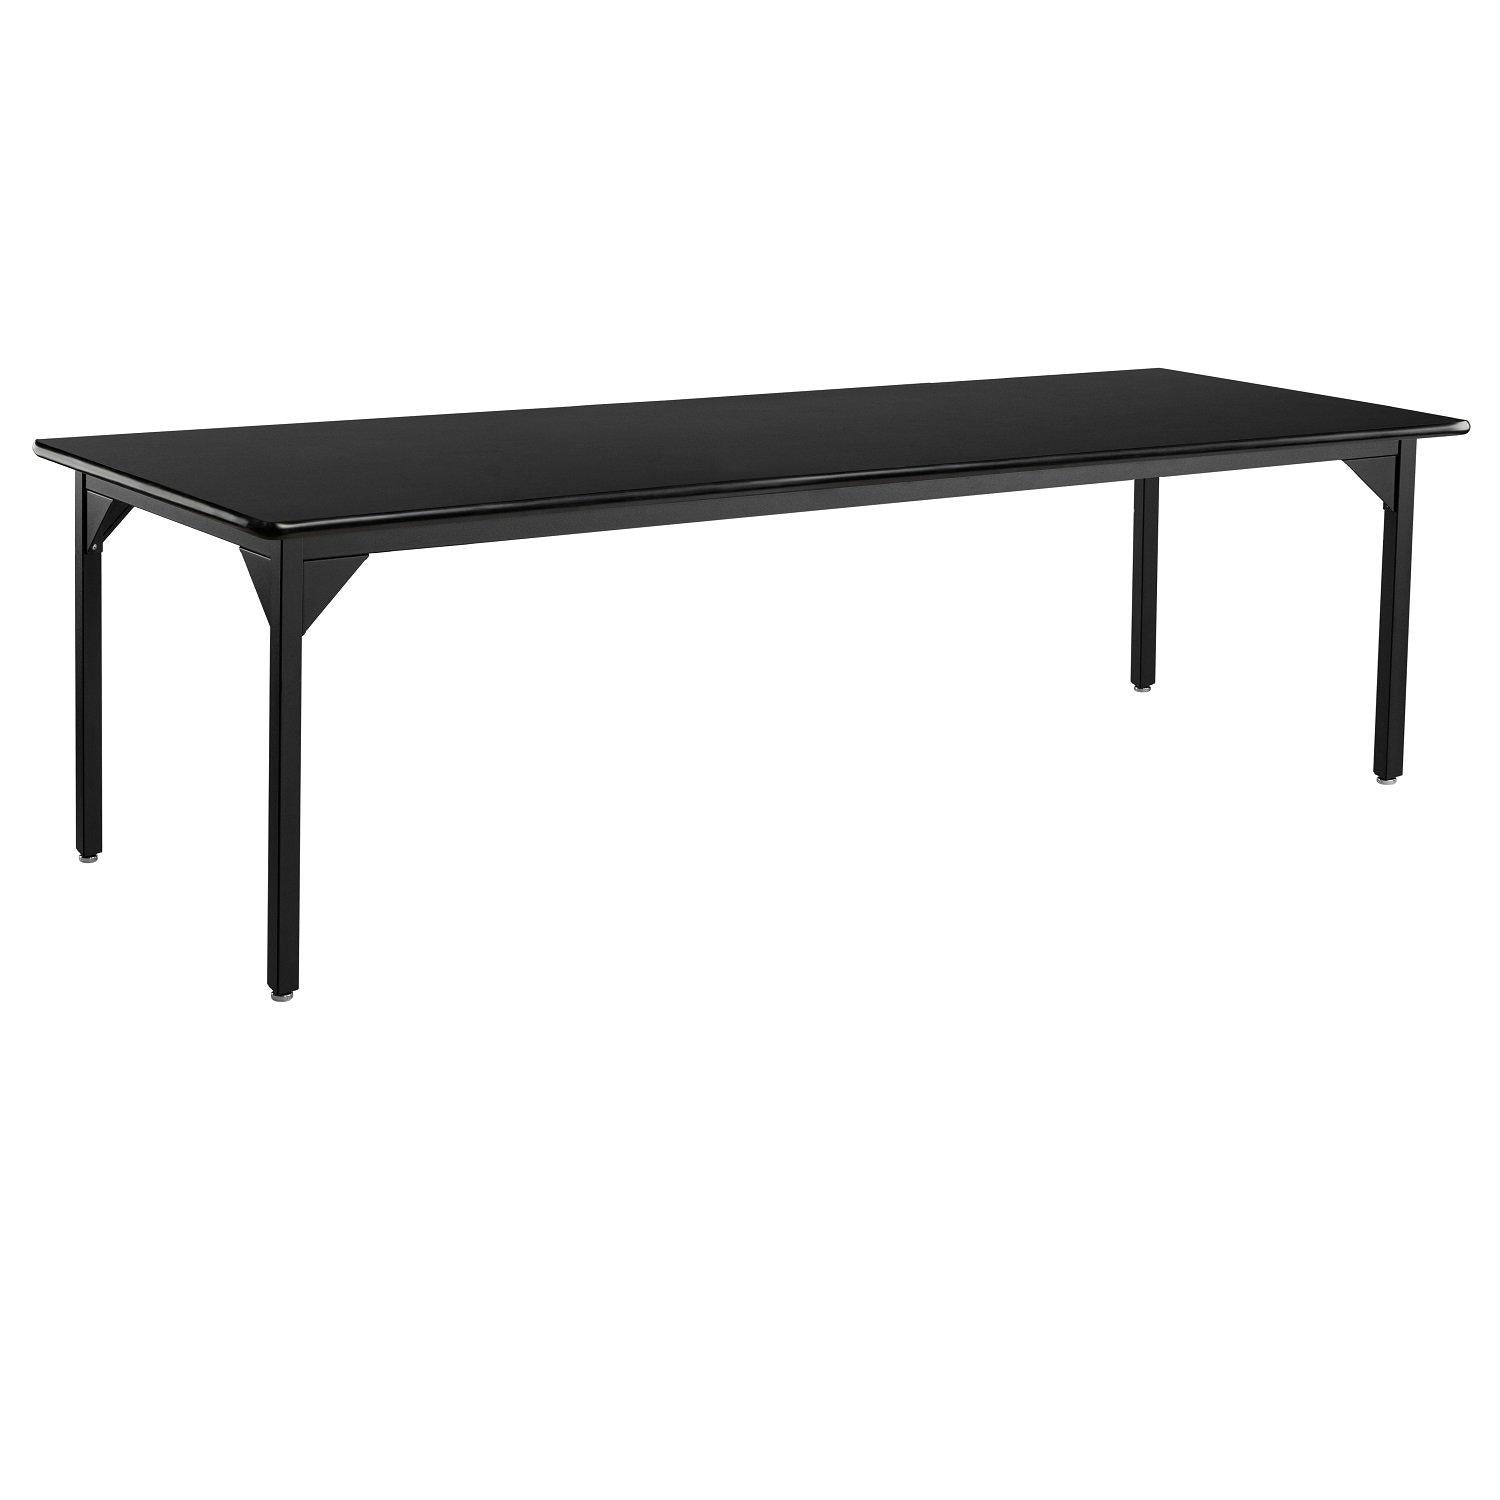 Heavy-Duty Fixed Height Utility Table, Black Frame, 36" x 72", High-Pressure Laminate Top with T-Mold Edge